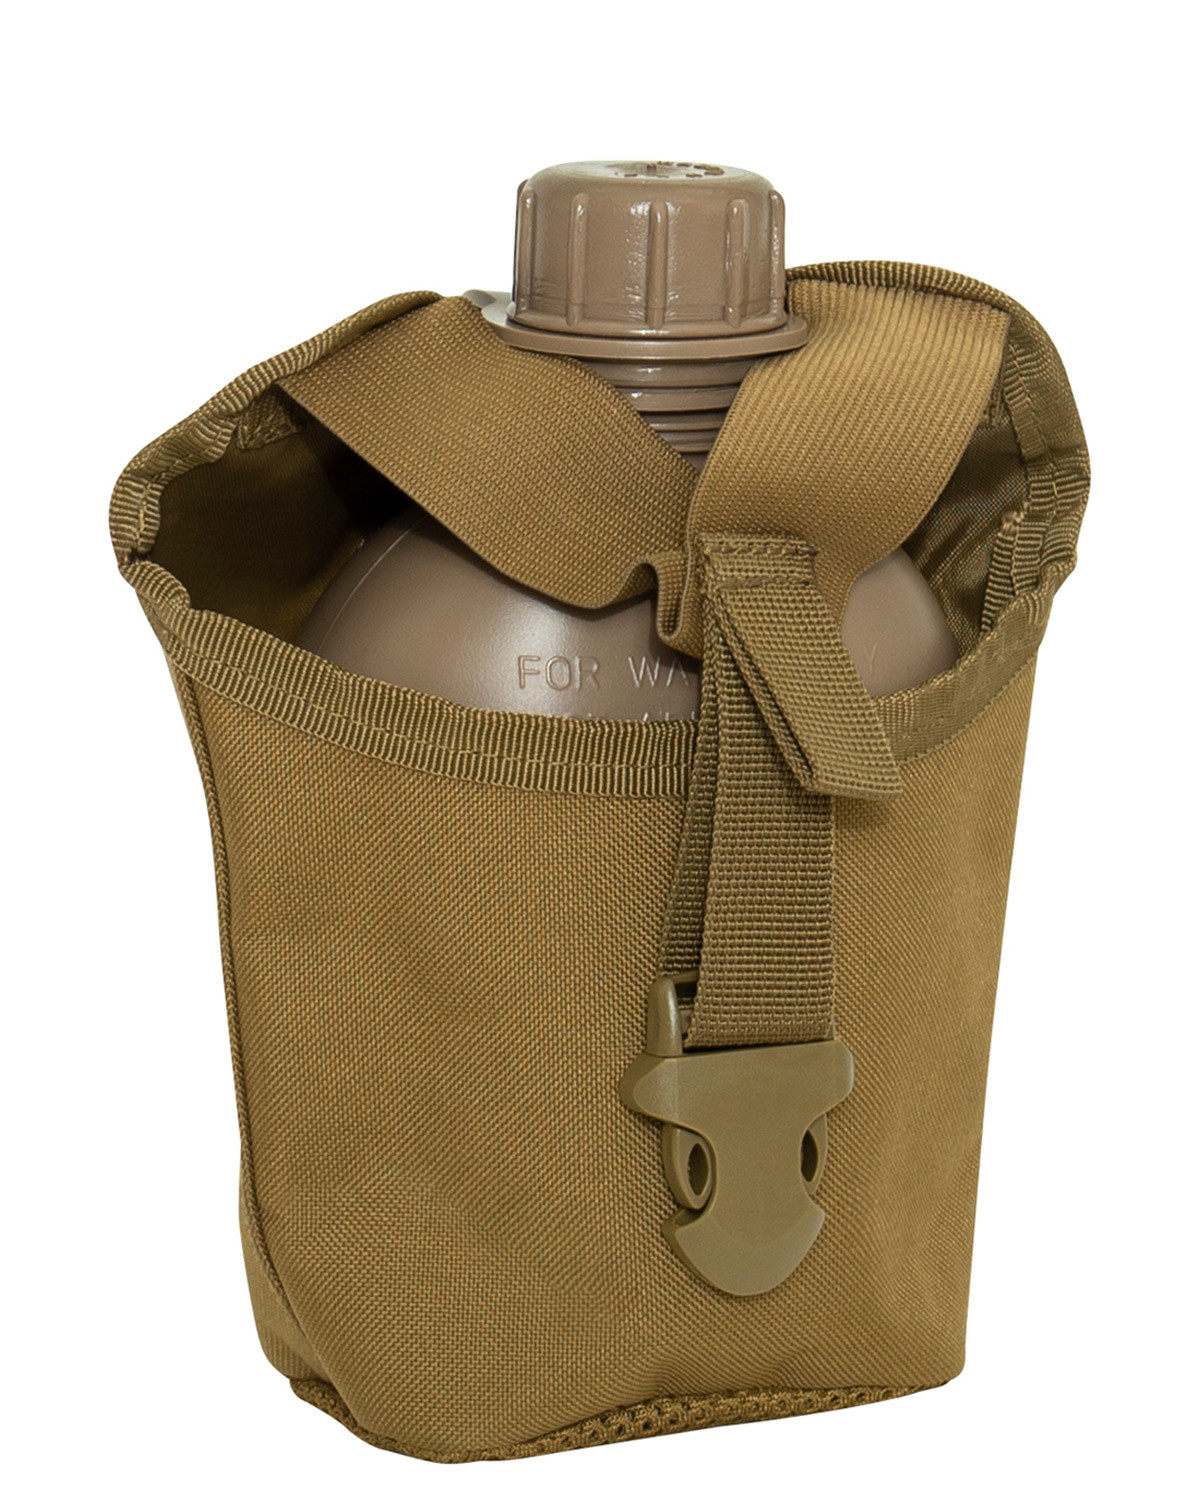 #2 - Rothco MOLLE Drikkedunk Etui 1 Liter (Coyote Brun, One Size)